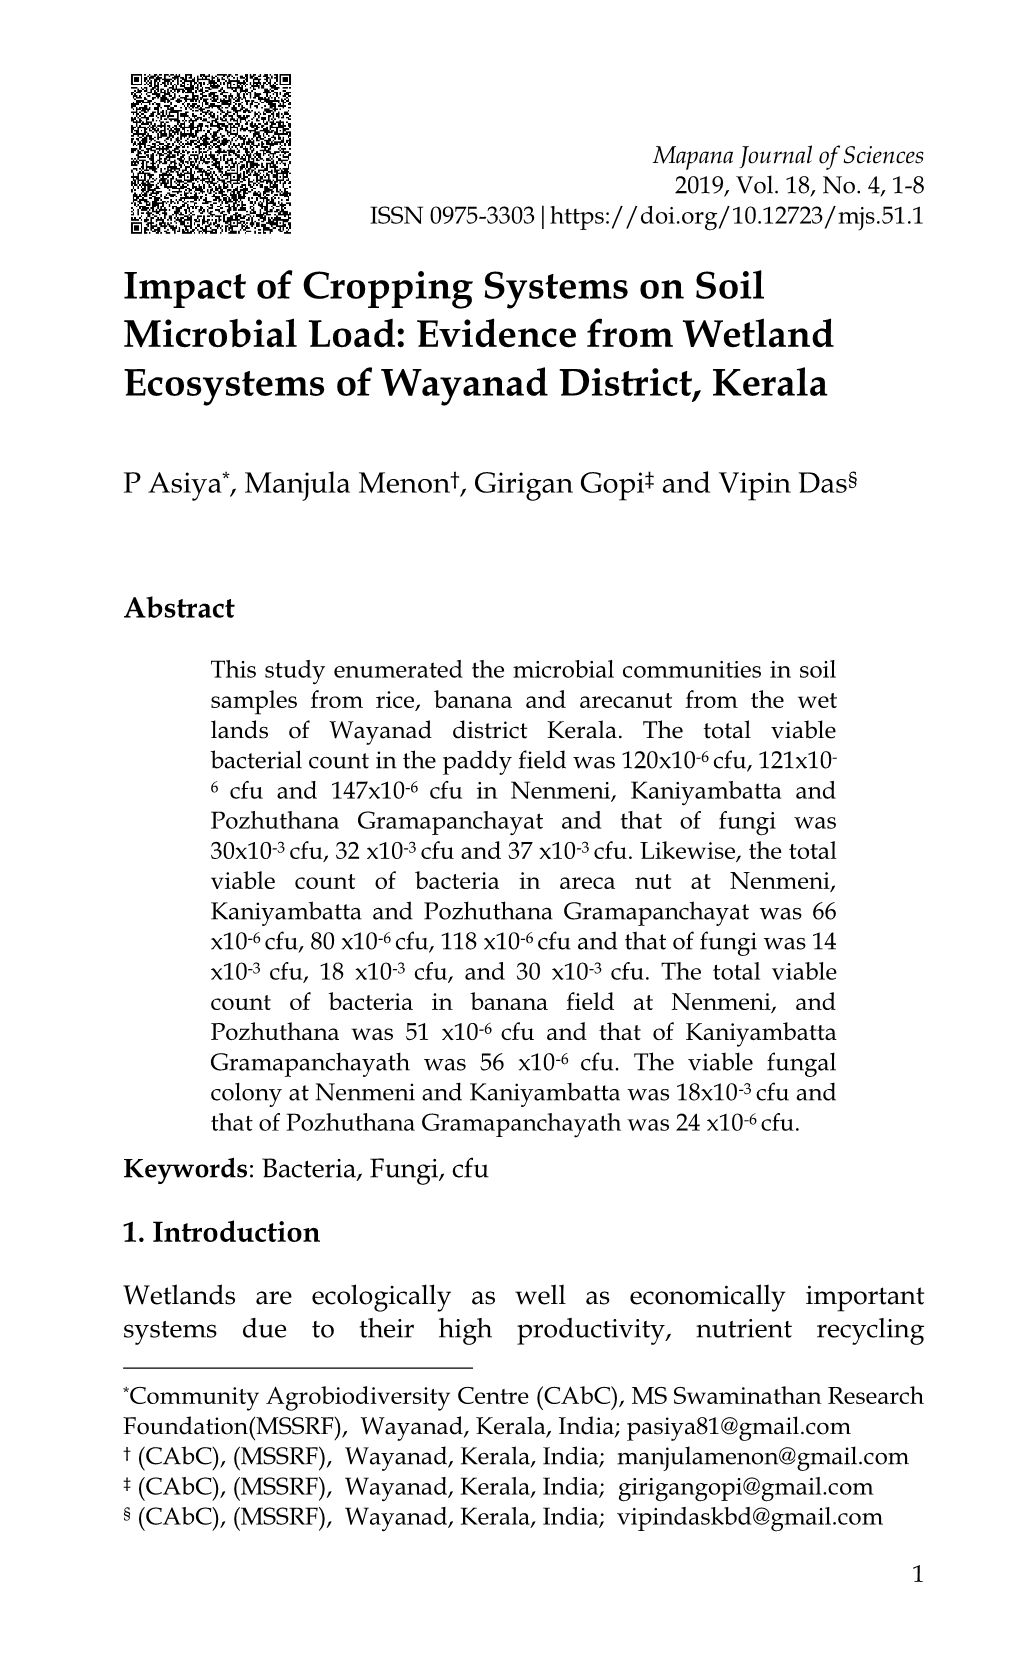 Impact of Cropping Systems on Soil Microbial Load: Evidence from Wetland Ecosystems of Wayanad District, Kerala